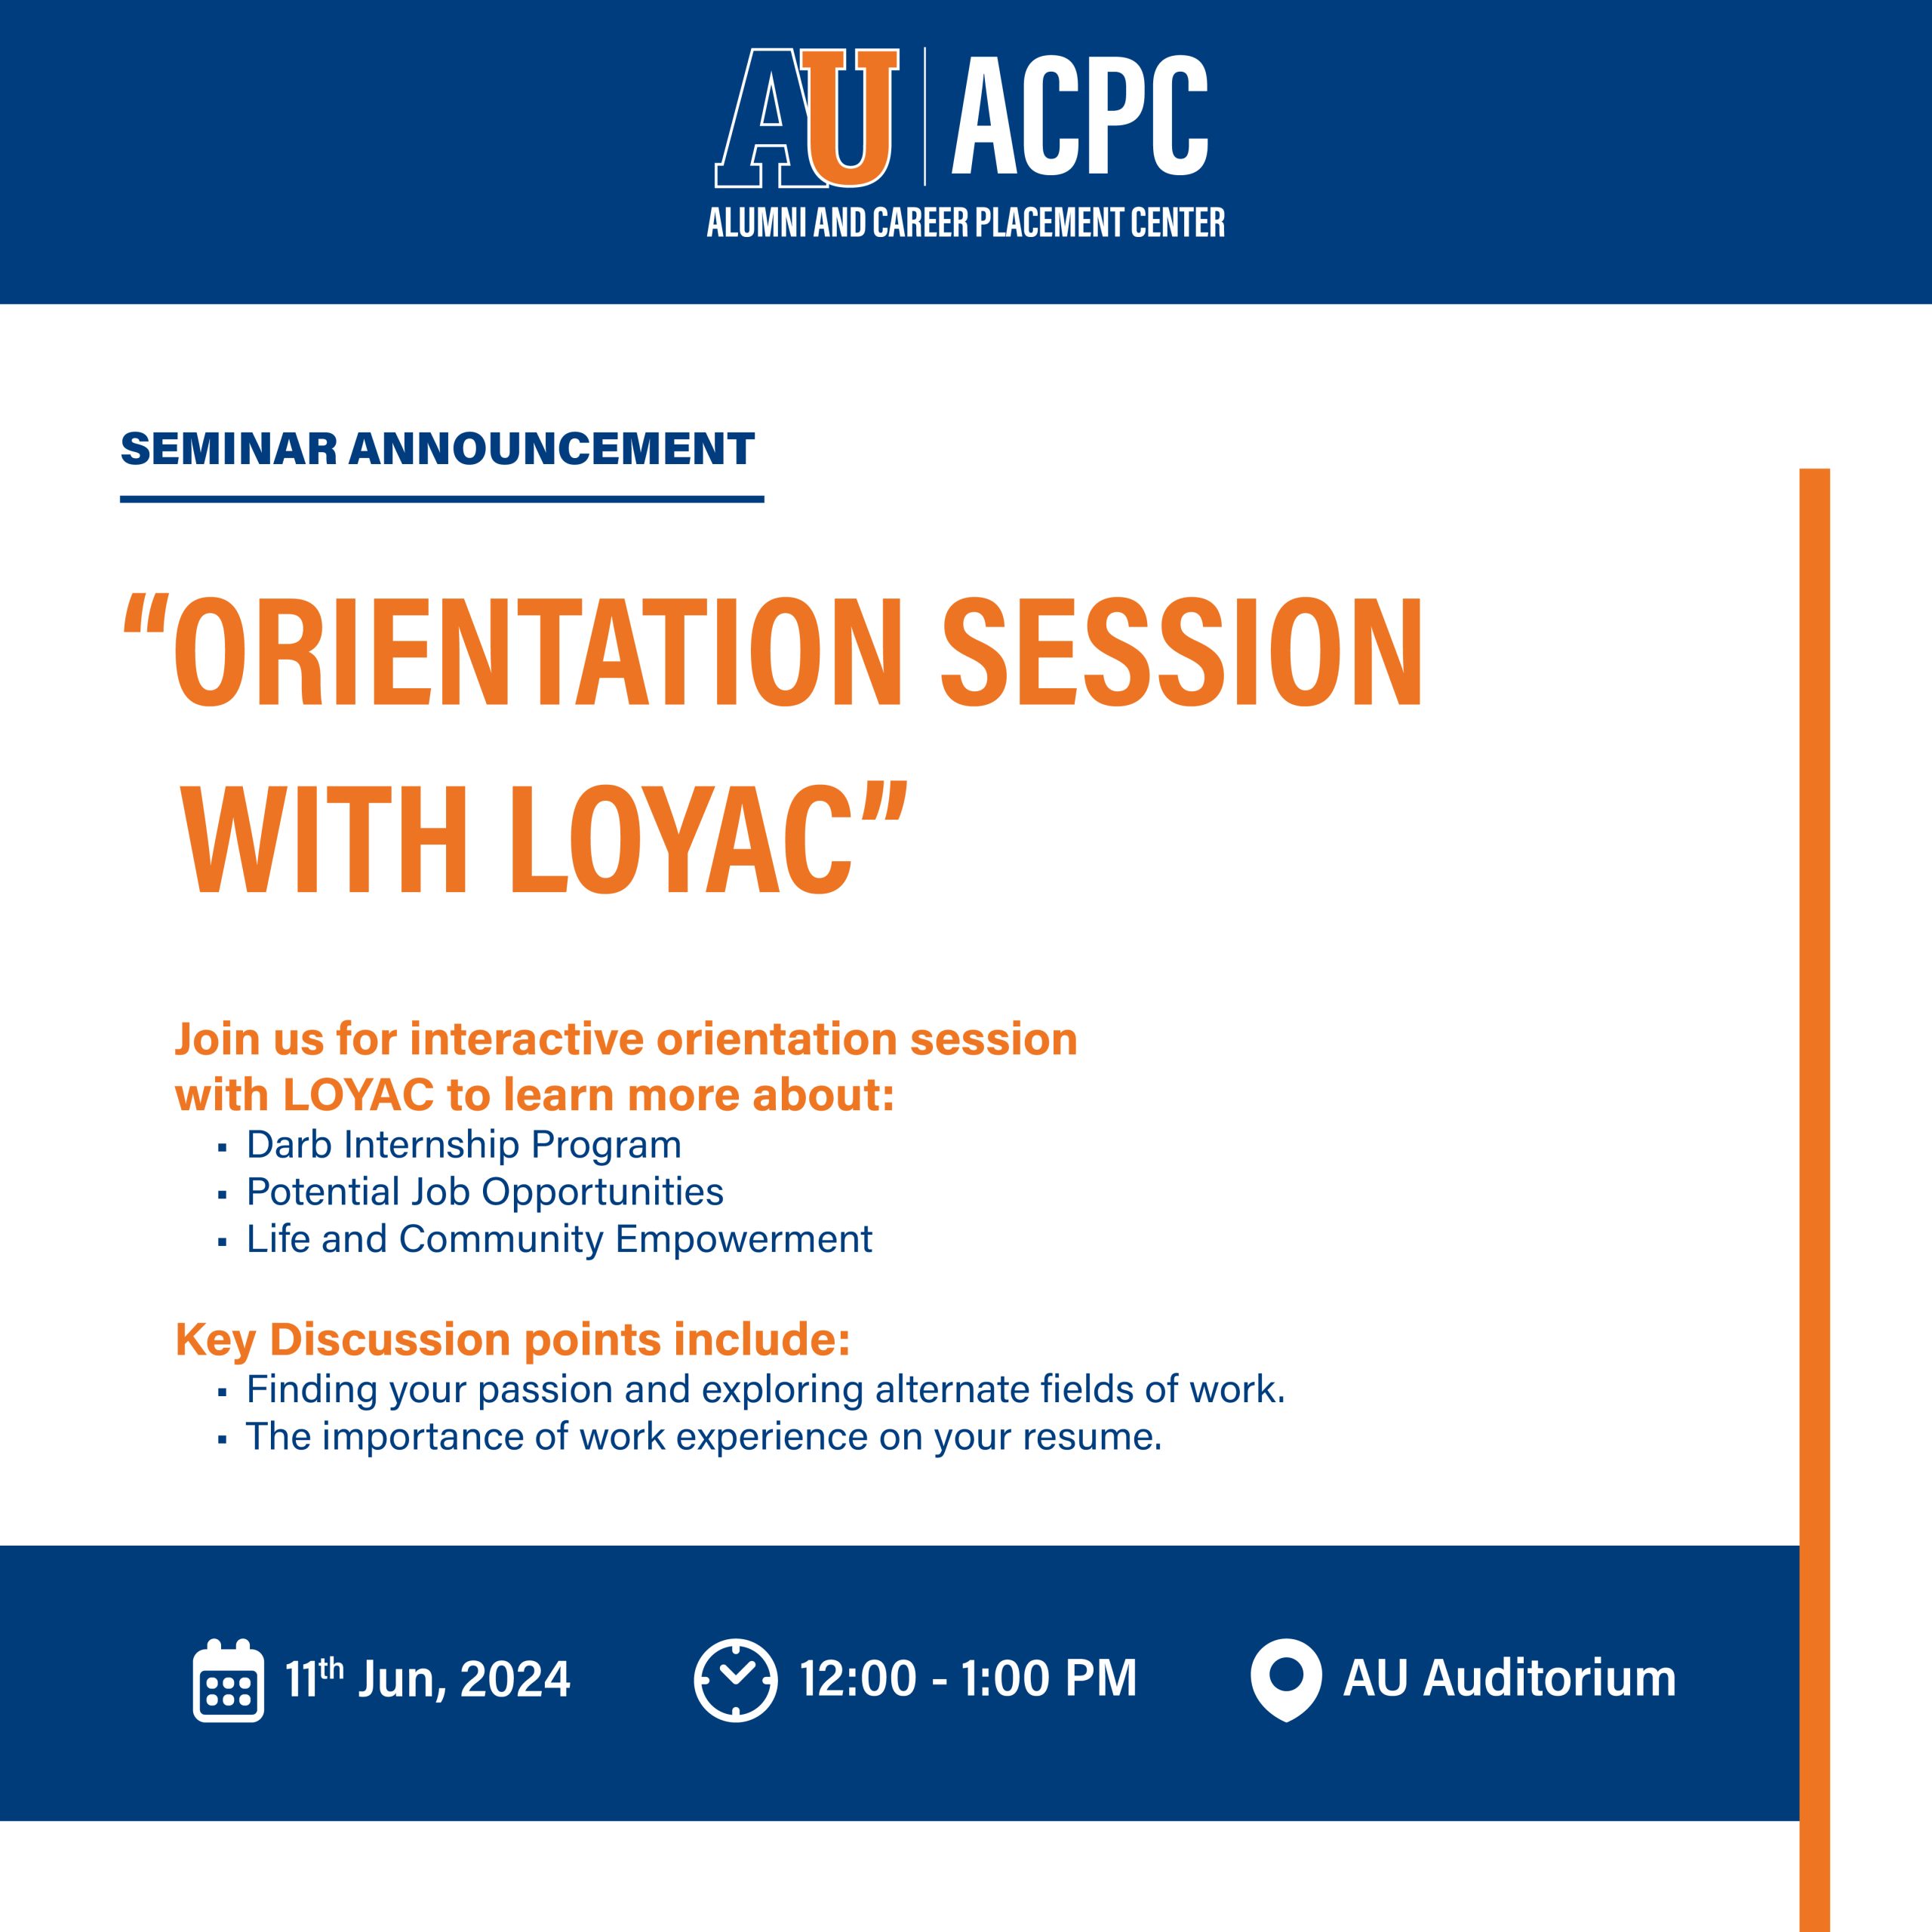 ORIENTATION SESSION WITH LOYAC